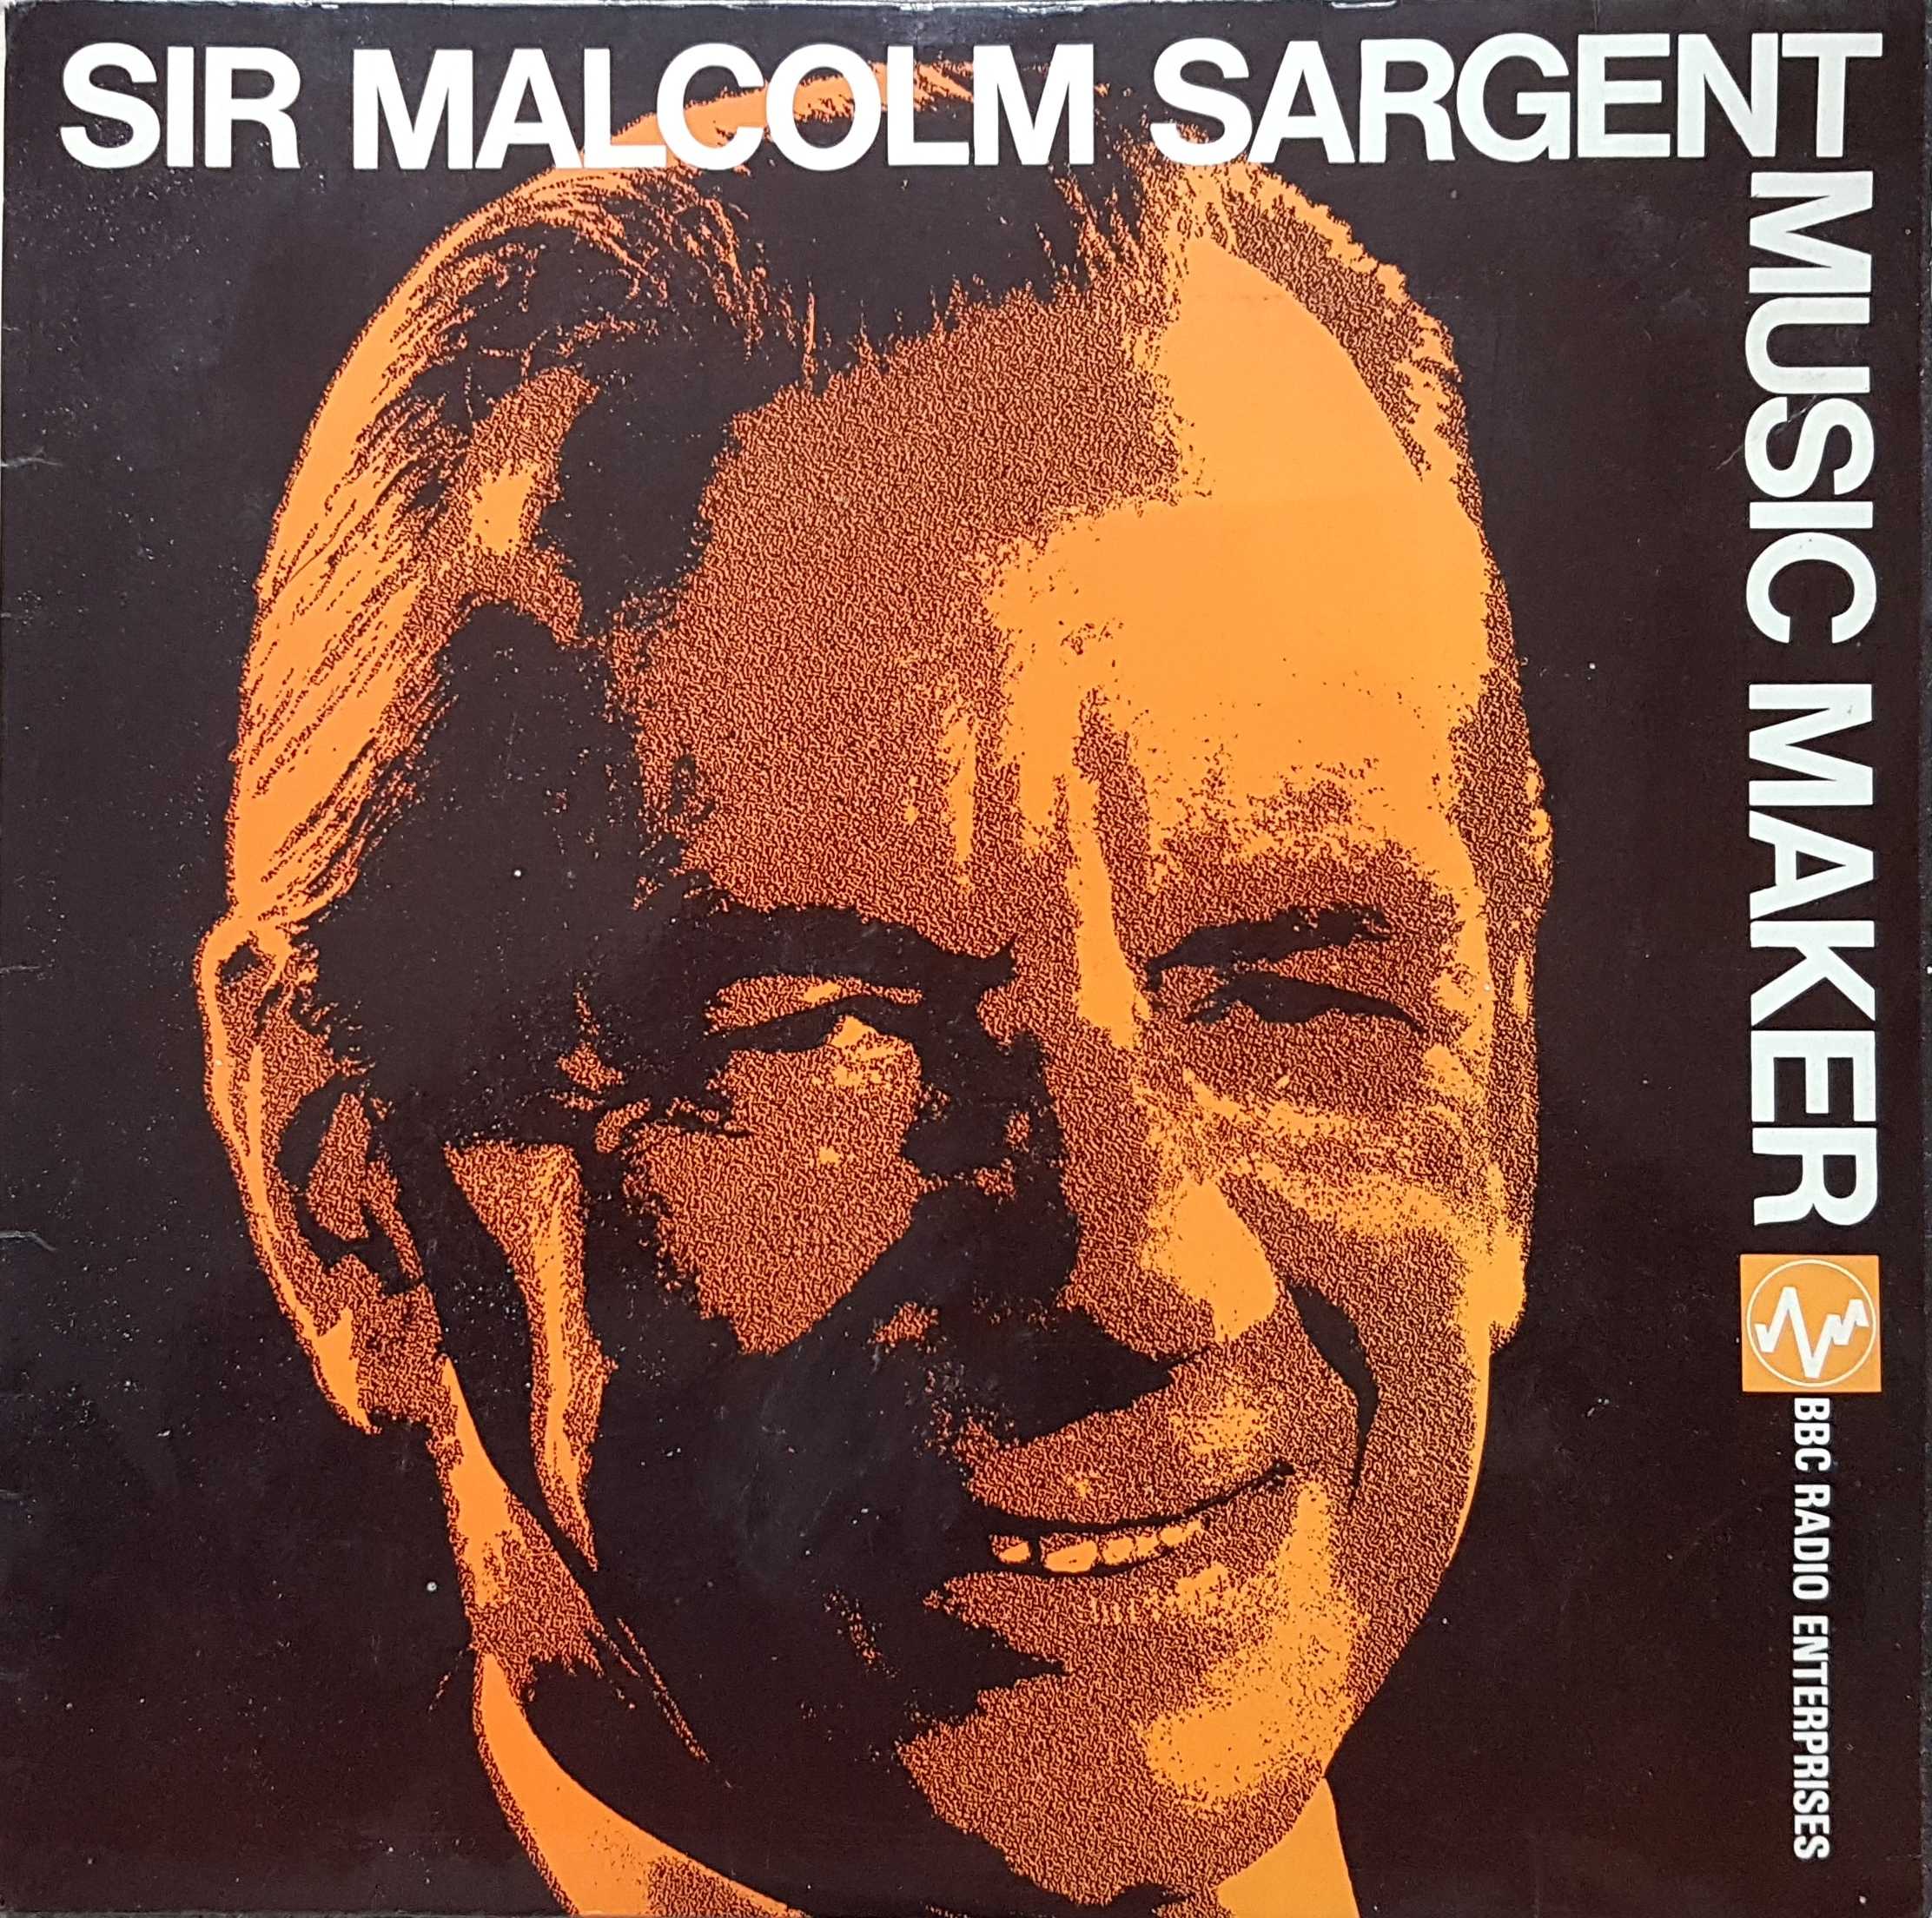 Picture of Sir Malcolm Sargent - Music maker by artist Sir Malcolm Sargent from the BBC albums - Records and Tapes library